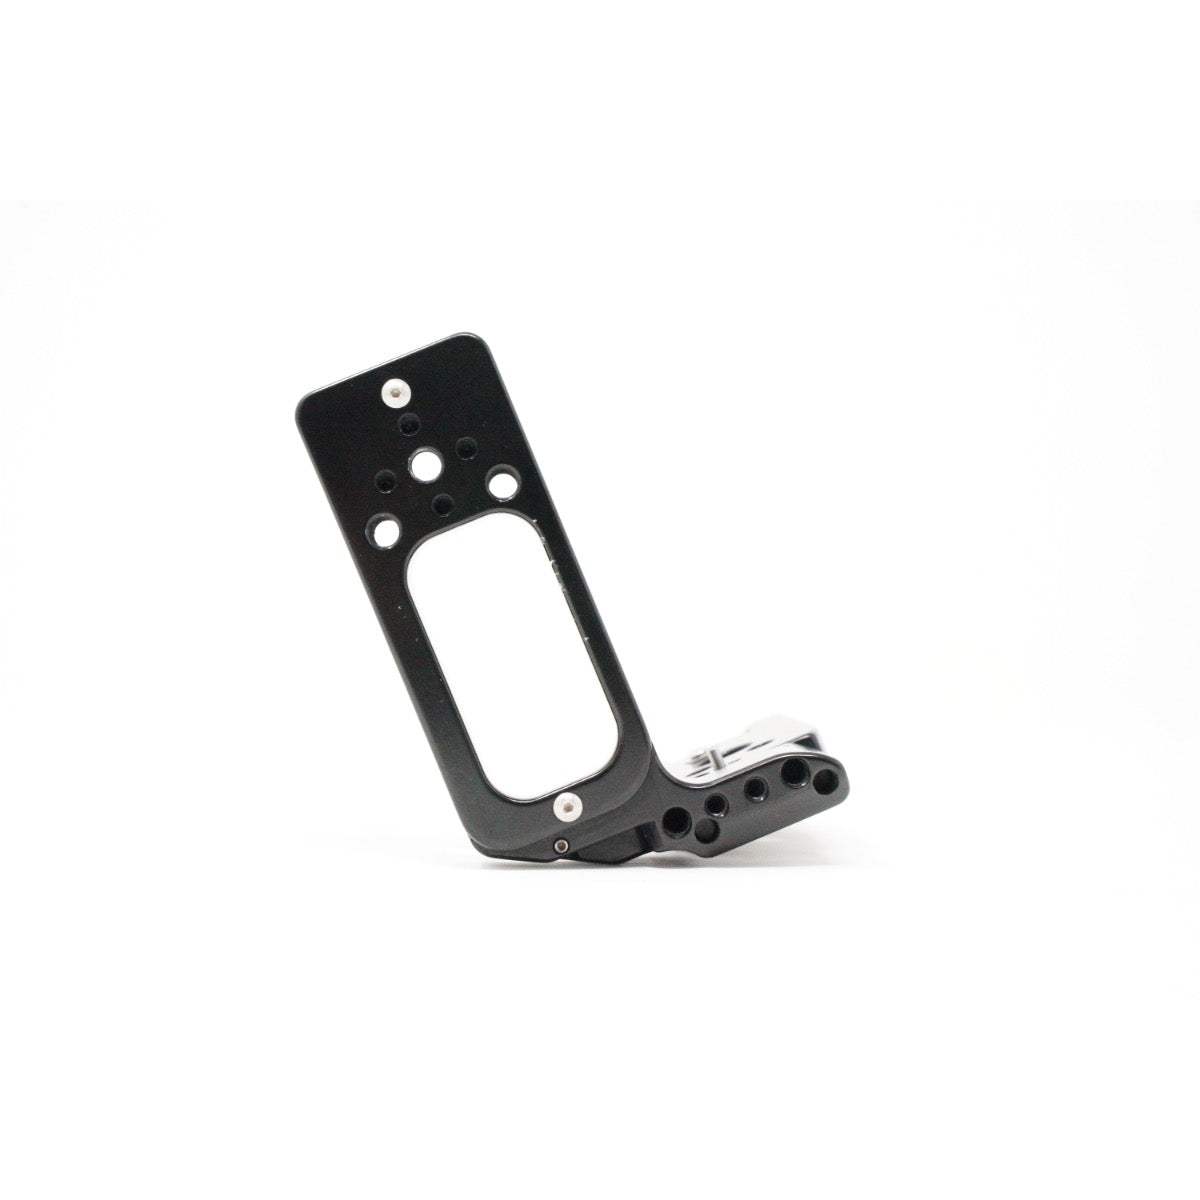 USED L-Bracket for Canon EOS R3 Mirrorless Camera